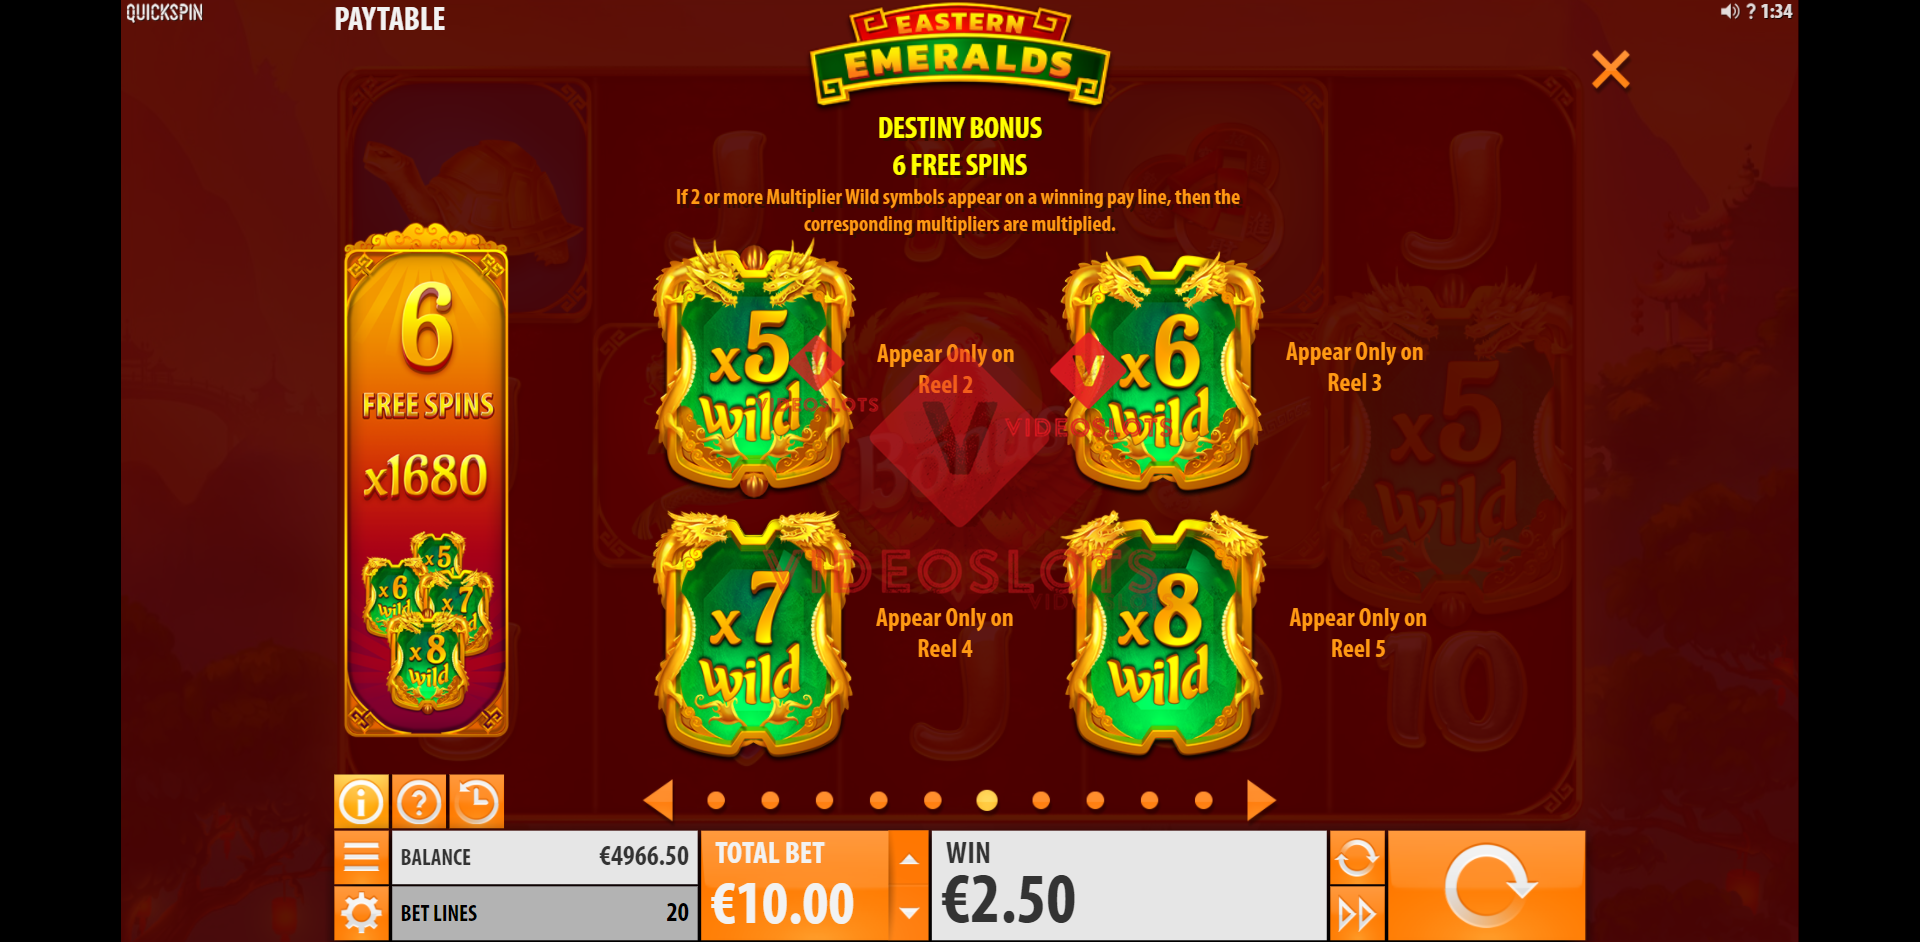 Pay Table and Game Info for Eastern Emeralds slot from Quickspin